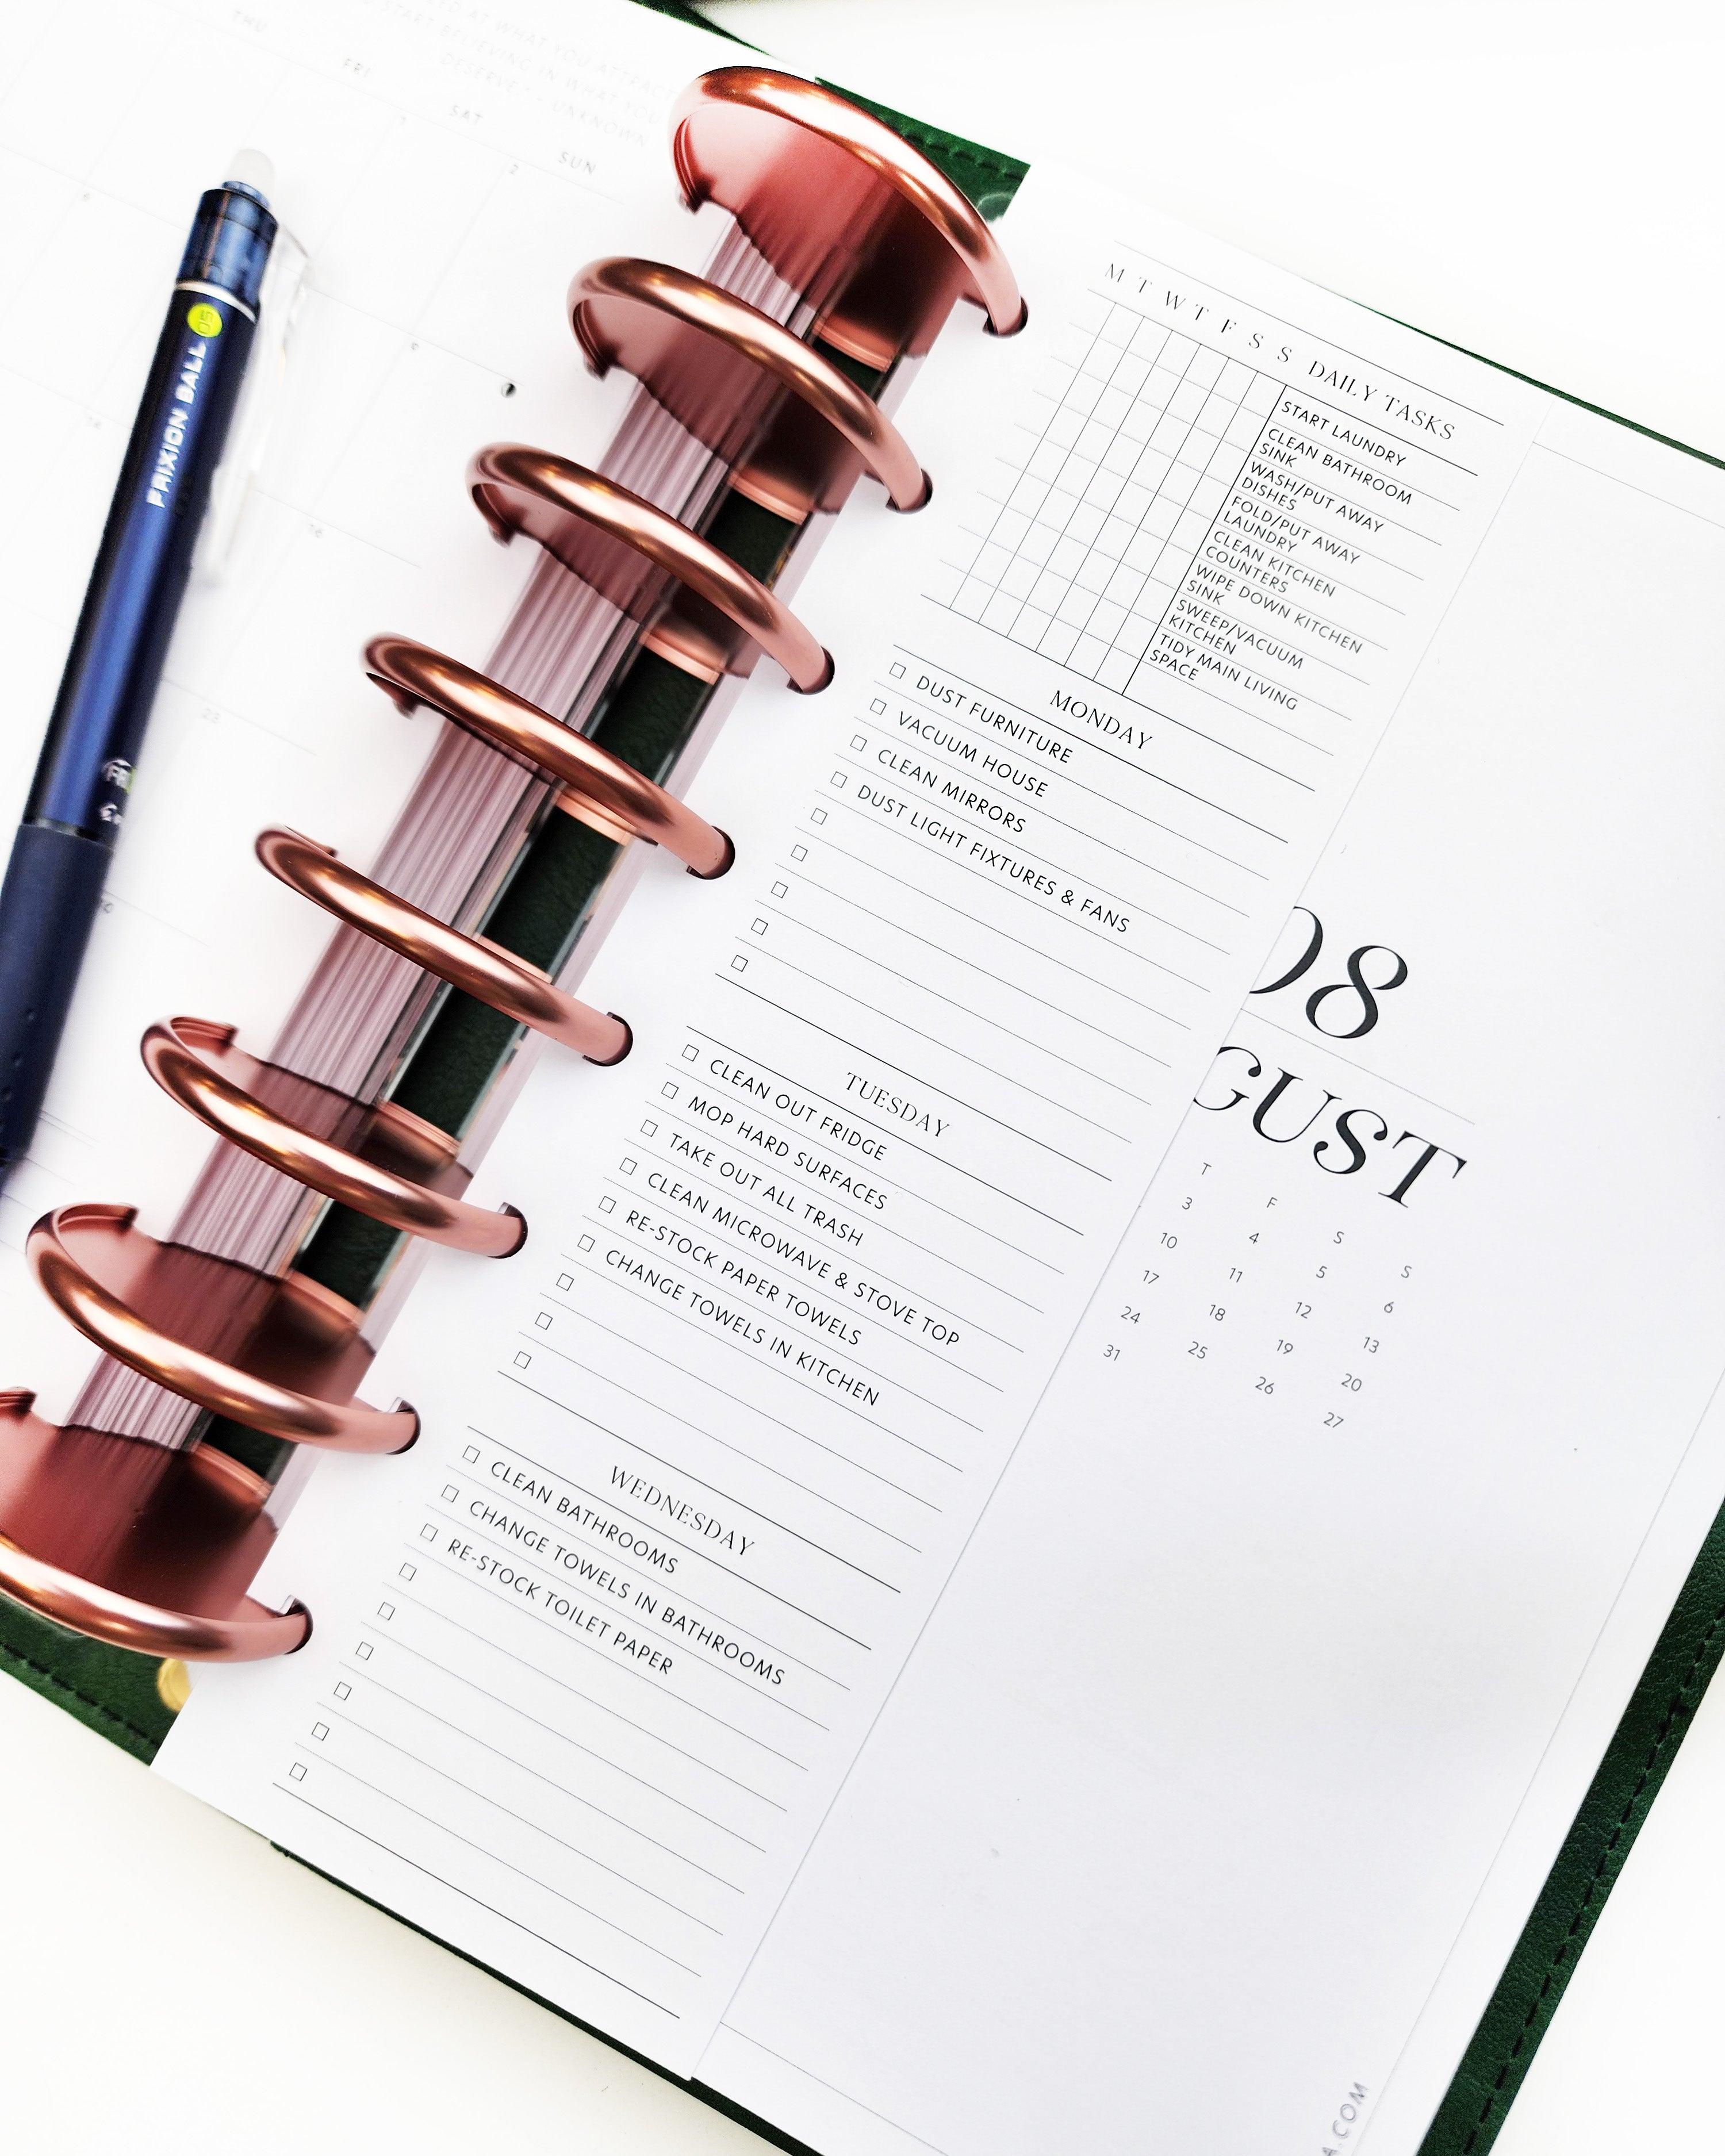 weekly cleaning planner inserts refill pages for six ring and discbound planner systems by Janes Agenda.